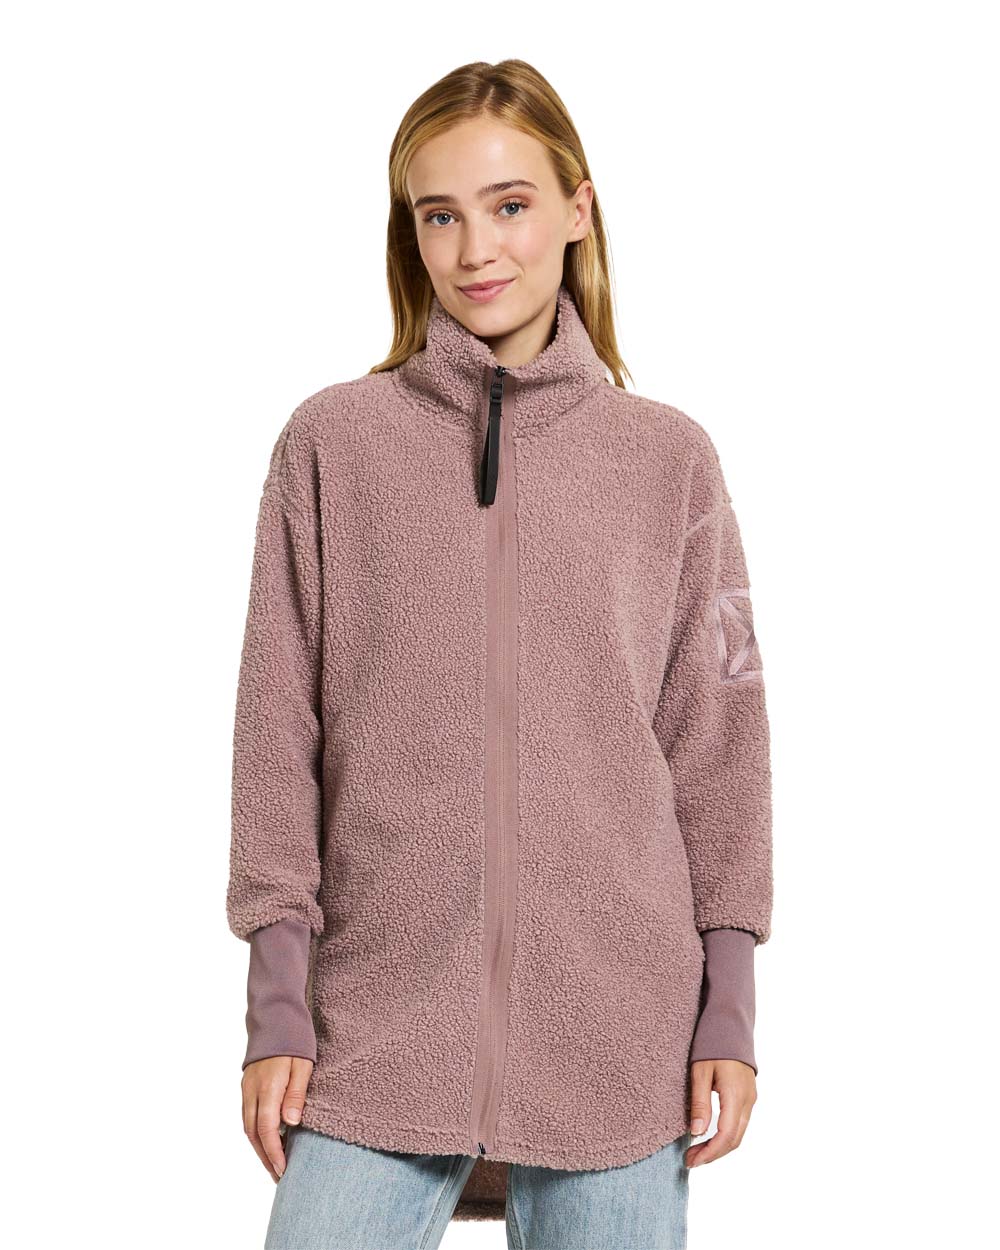 Faded Wine coloured Didriksons Full-Zip Jacket on White background 